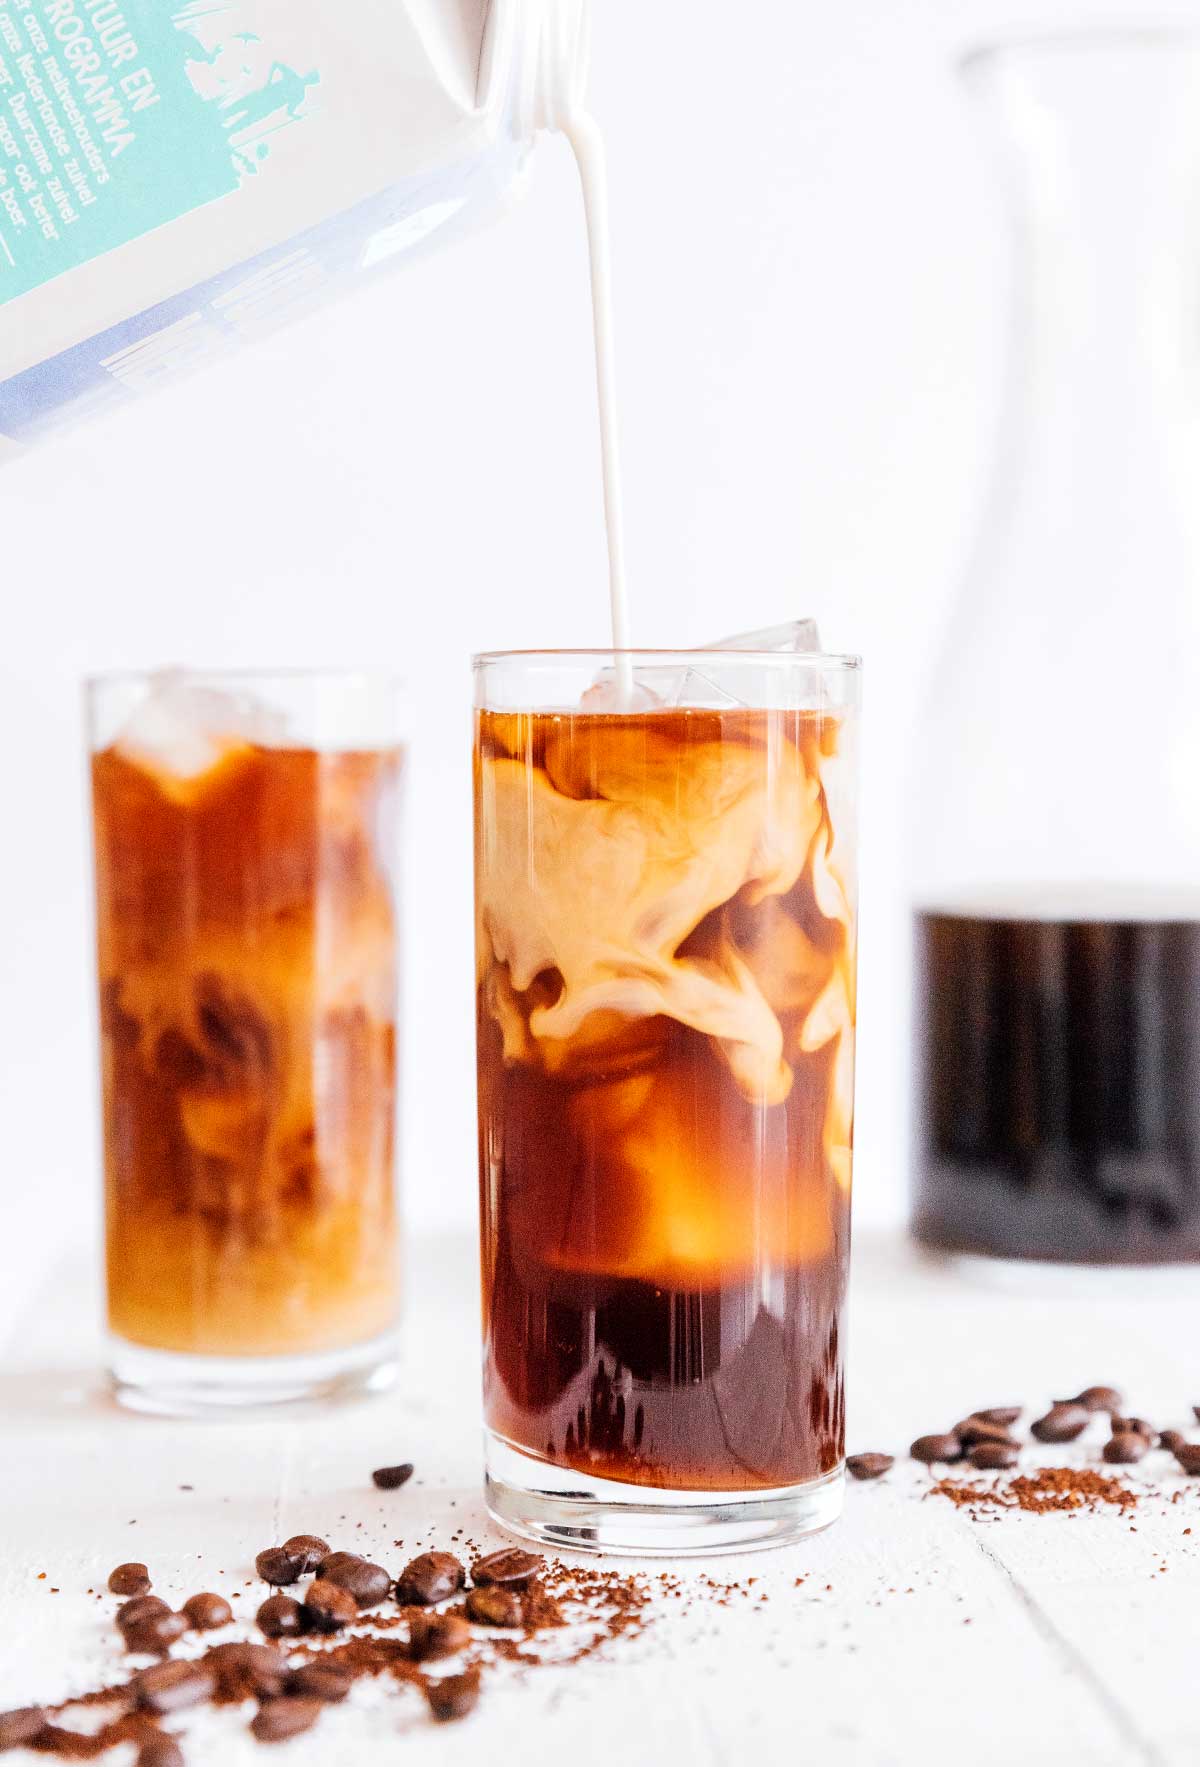 Pouring cream into a tall glass of cold brew coffee